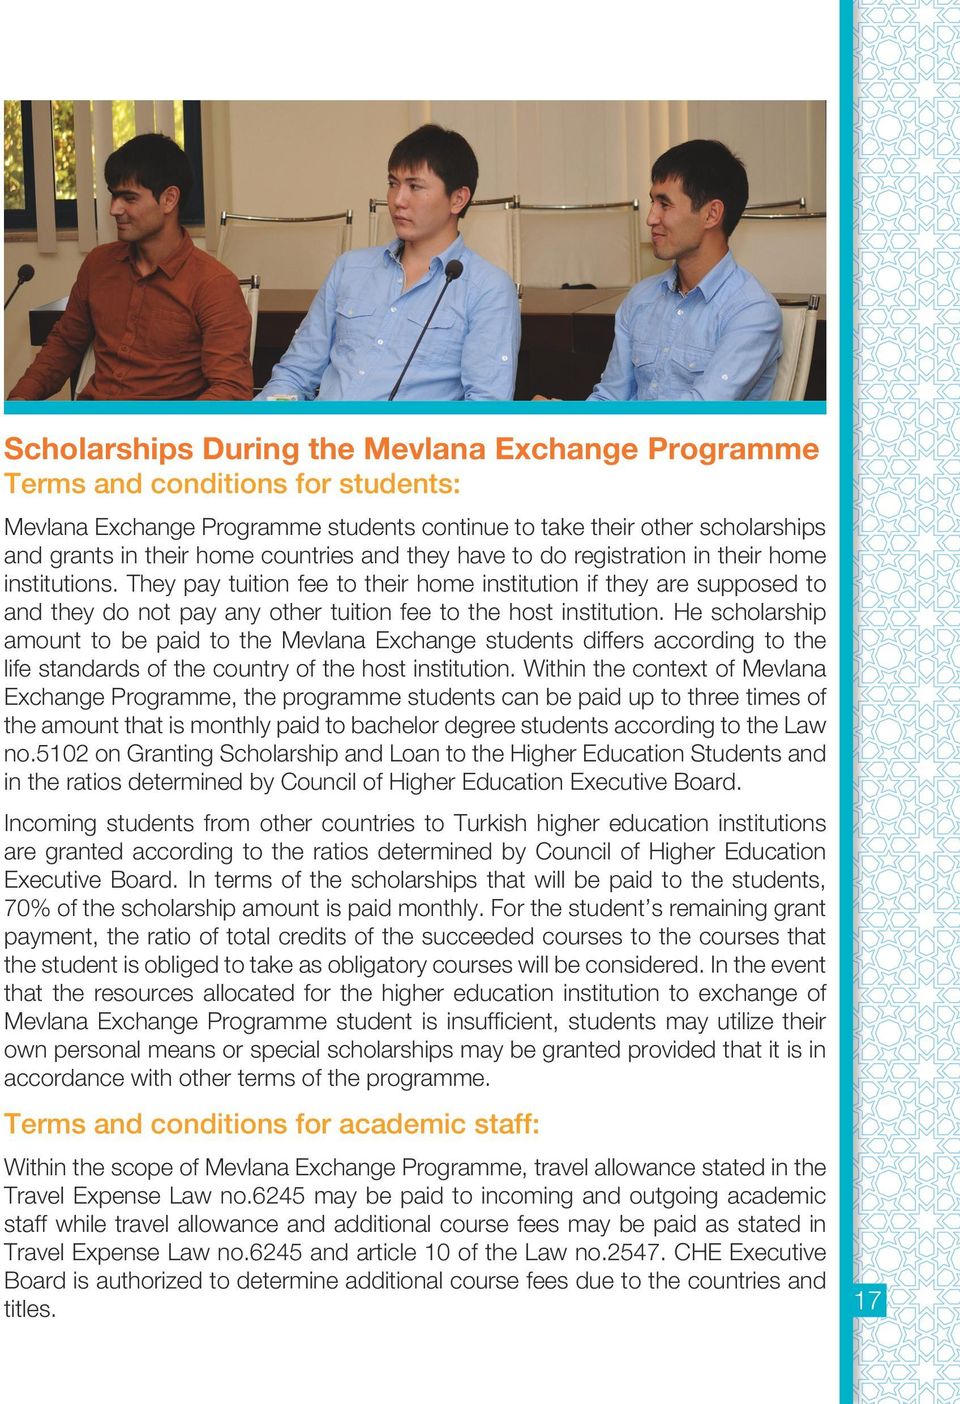 He scholarship amount to be paid to the Mevlana Exchange students differs according to the life standards of the country of the host institution.